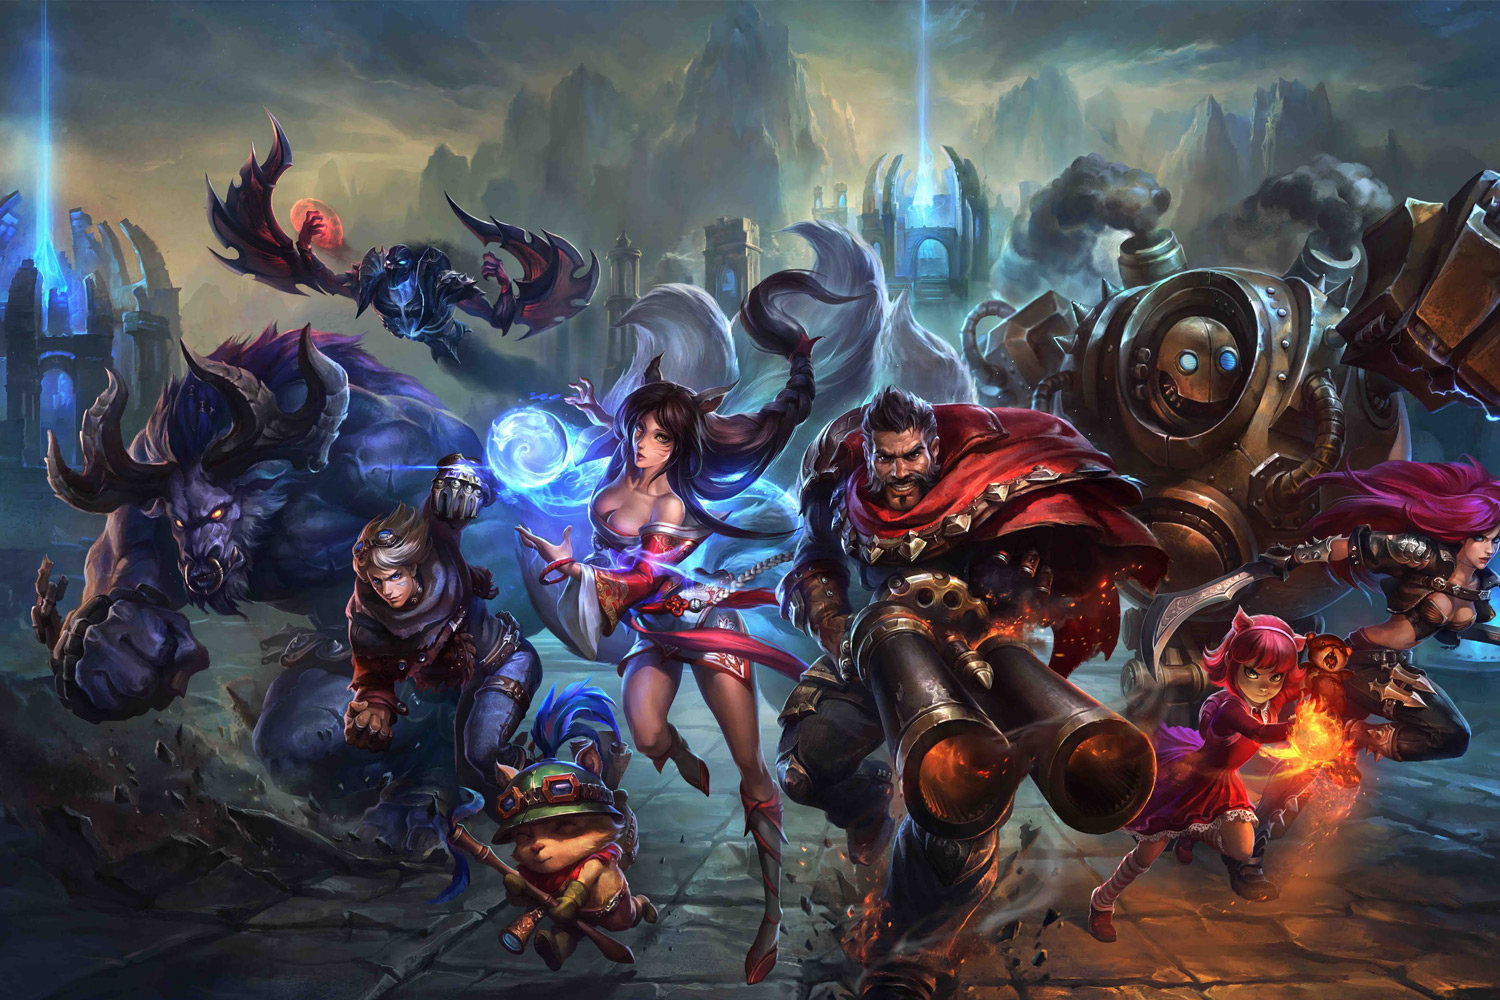 News: Tencent may build an Esports themed town in China ... - 